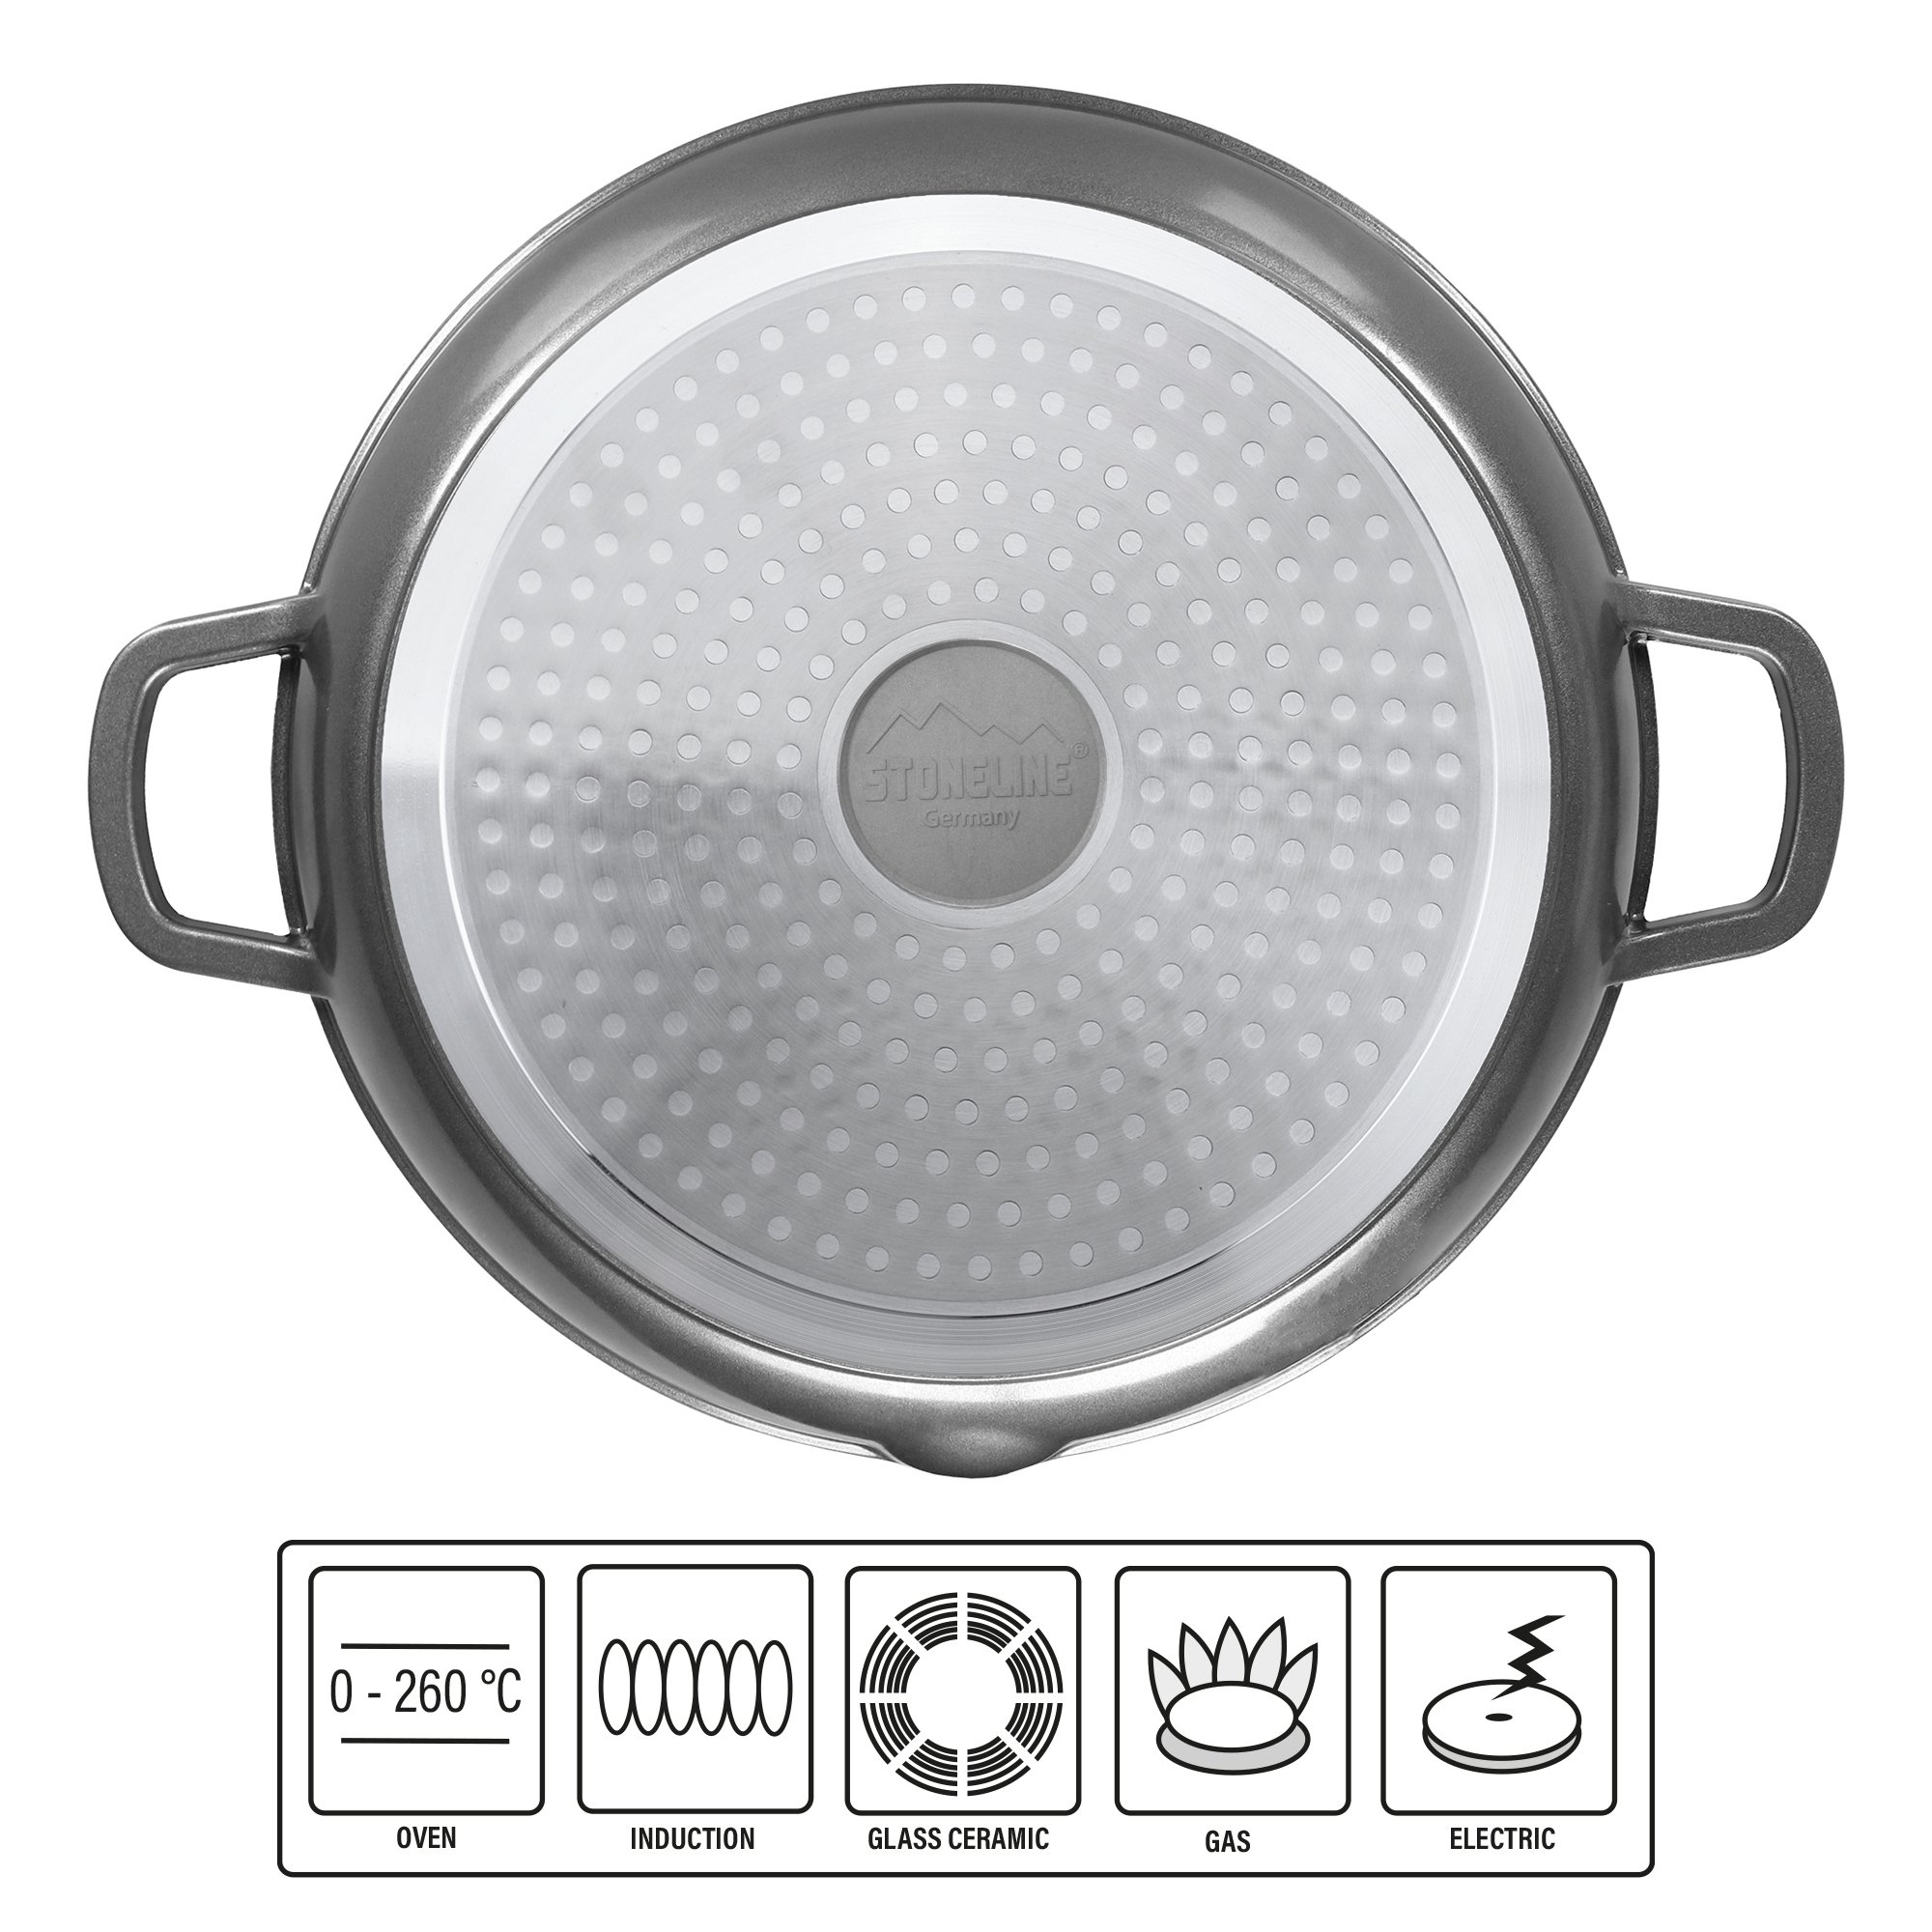 STONELINE® Grease-free griddle 28 cm, pan non-stick coated, induction and oven-safe